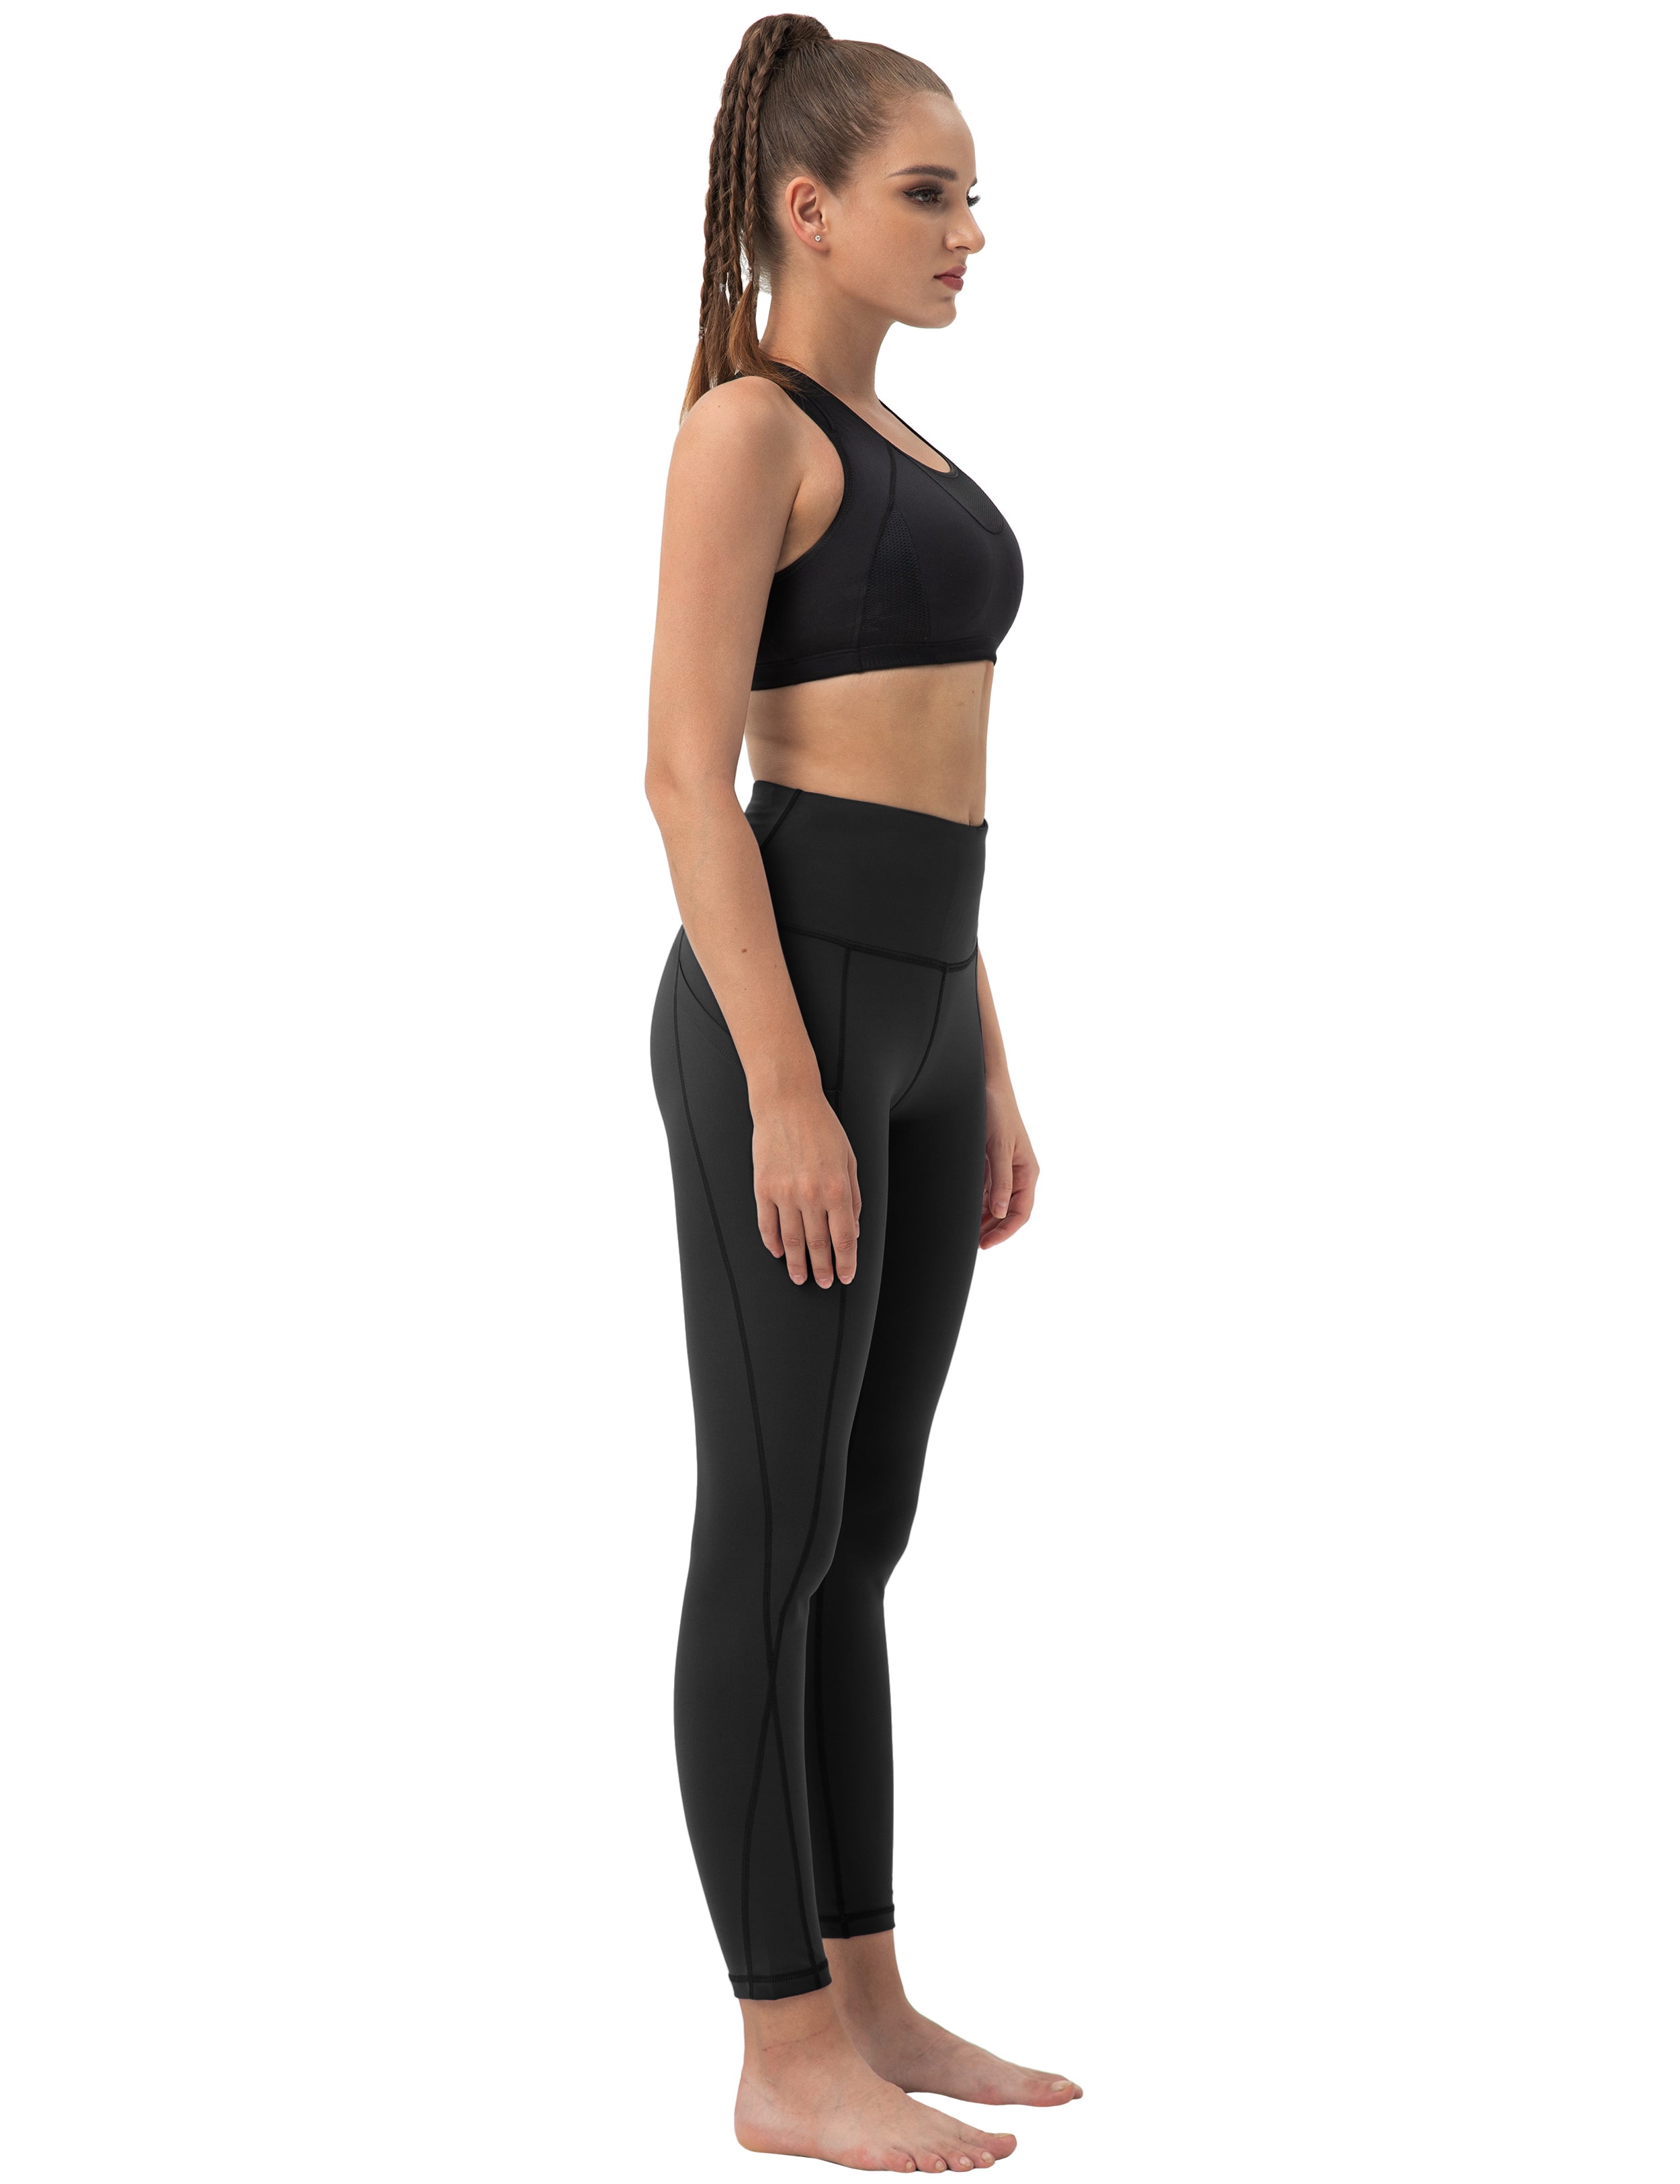 High Waist Side Pockets yogastudio Pants black 75% Nylon, 25% Spandex Fabric doesn't attract lint easily 4-way stretch No see-through Moisture-wicking Tummy control Inner pocket